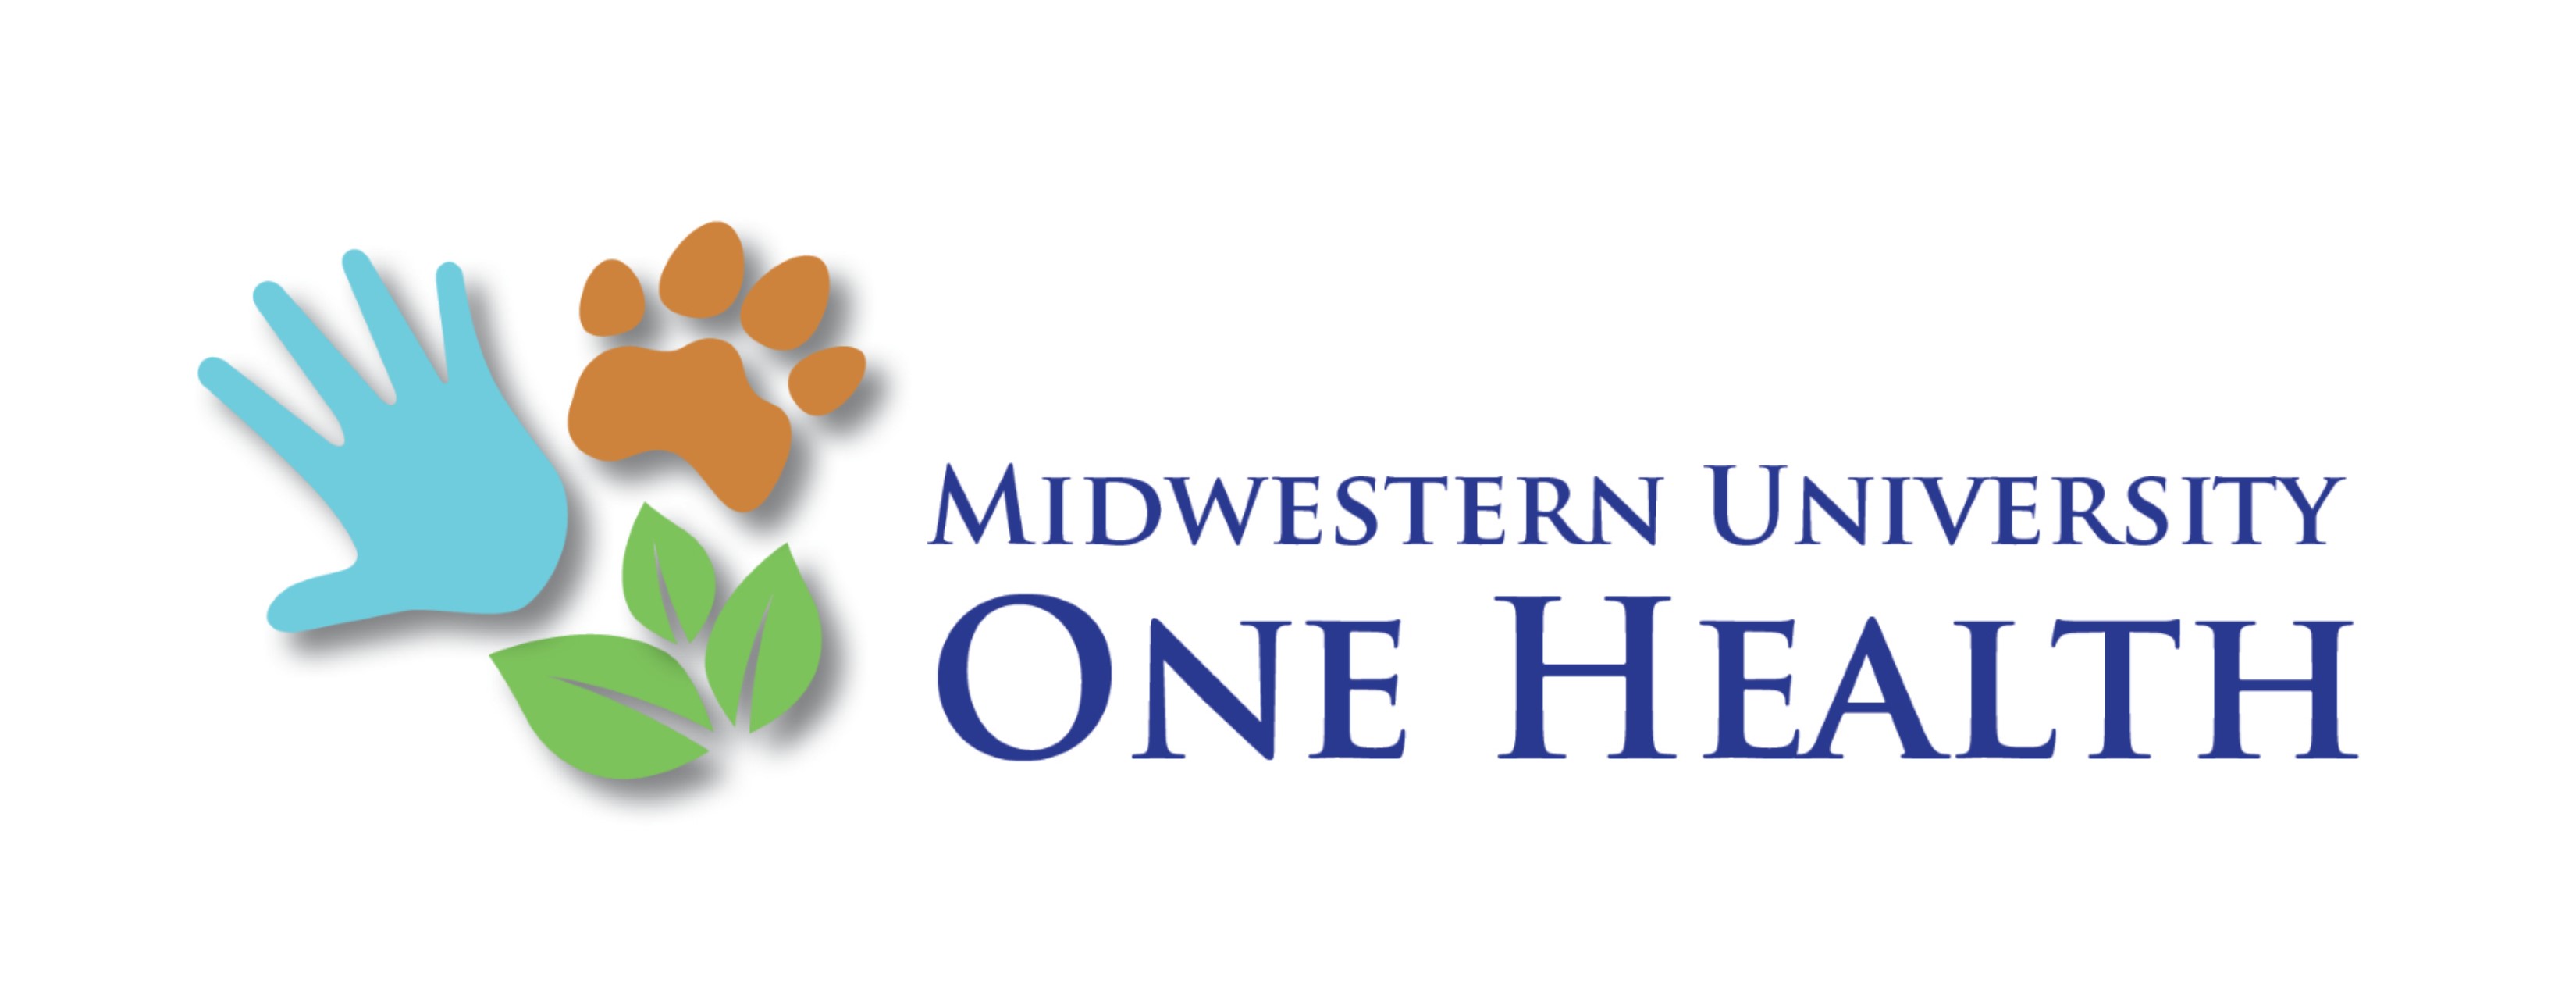 Midwestern University One Health initiative logo with a palmprint, leaves, and pawprint.